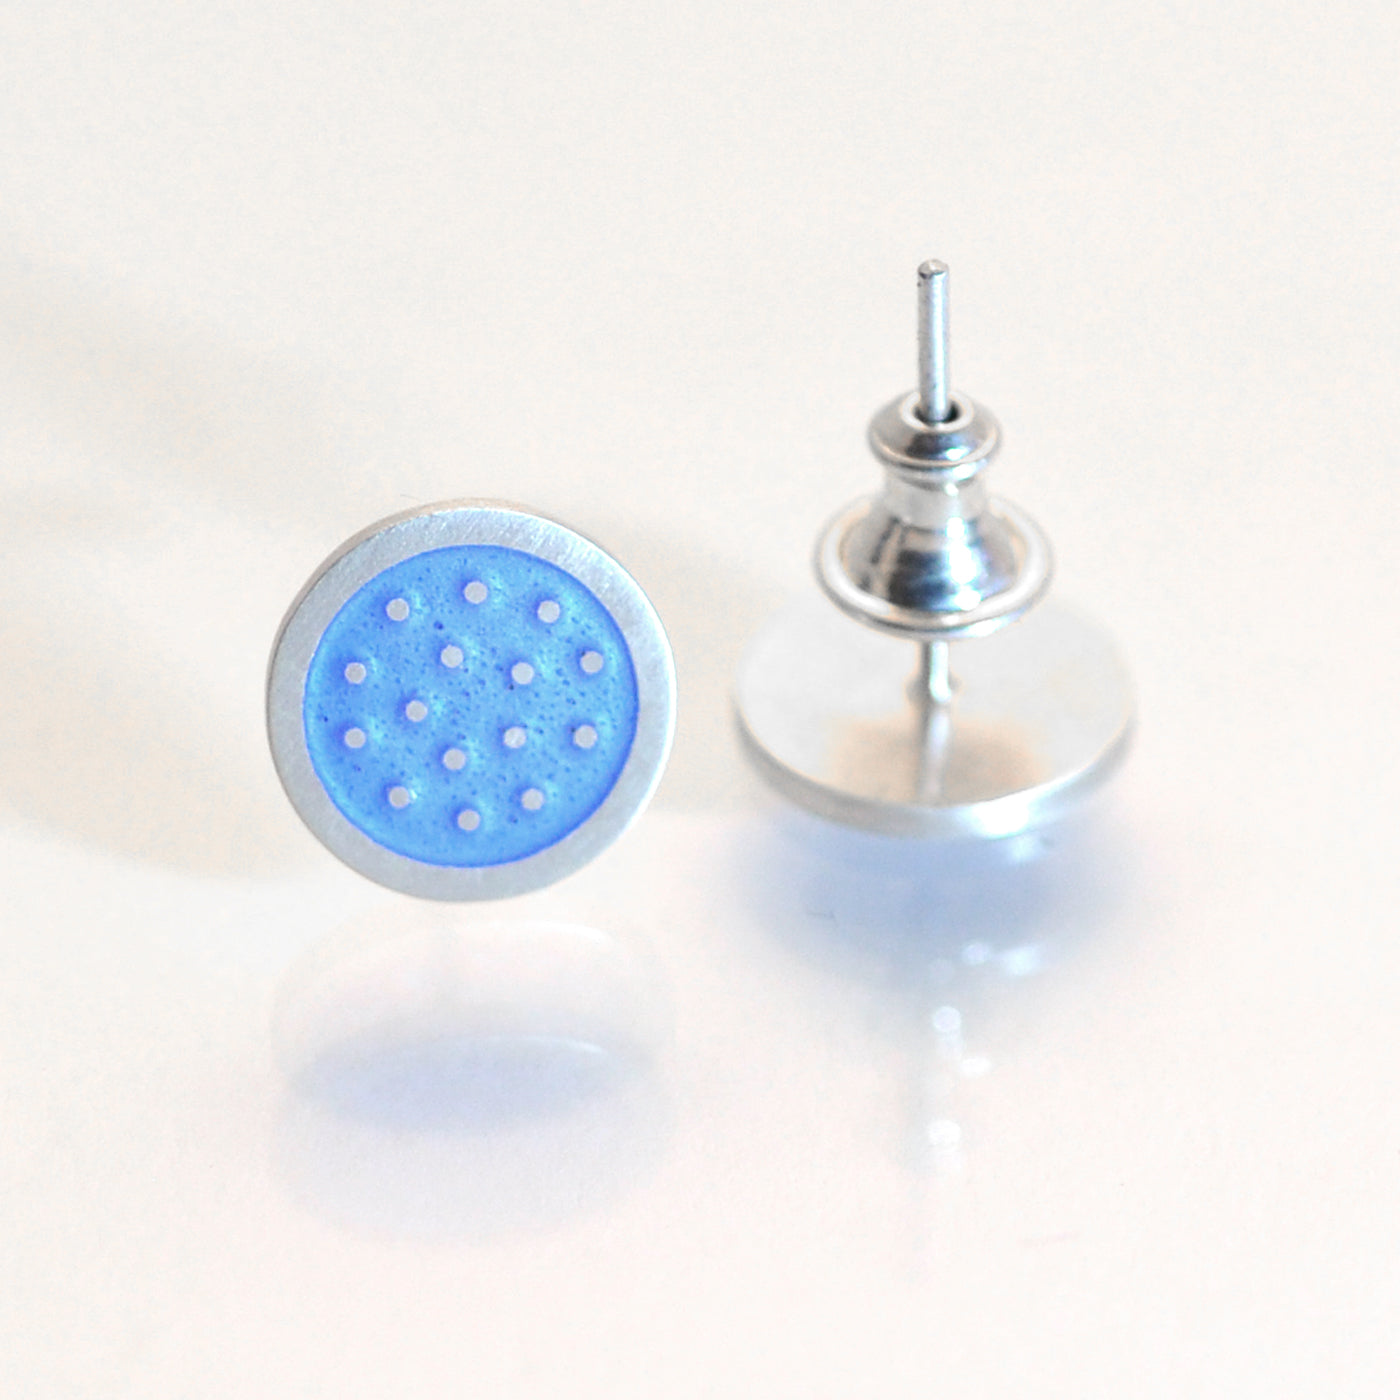 Dotty silver and enamelled ear studs, small